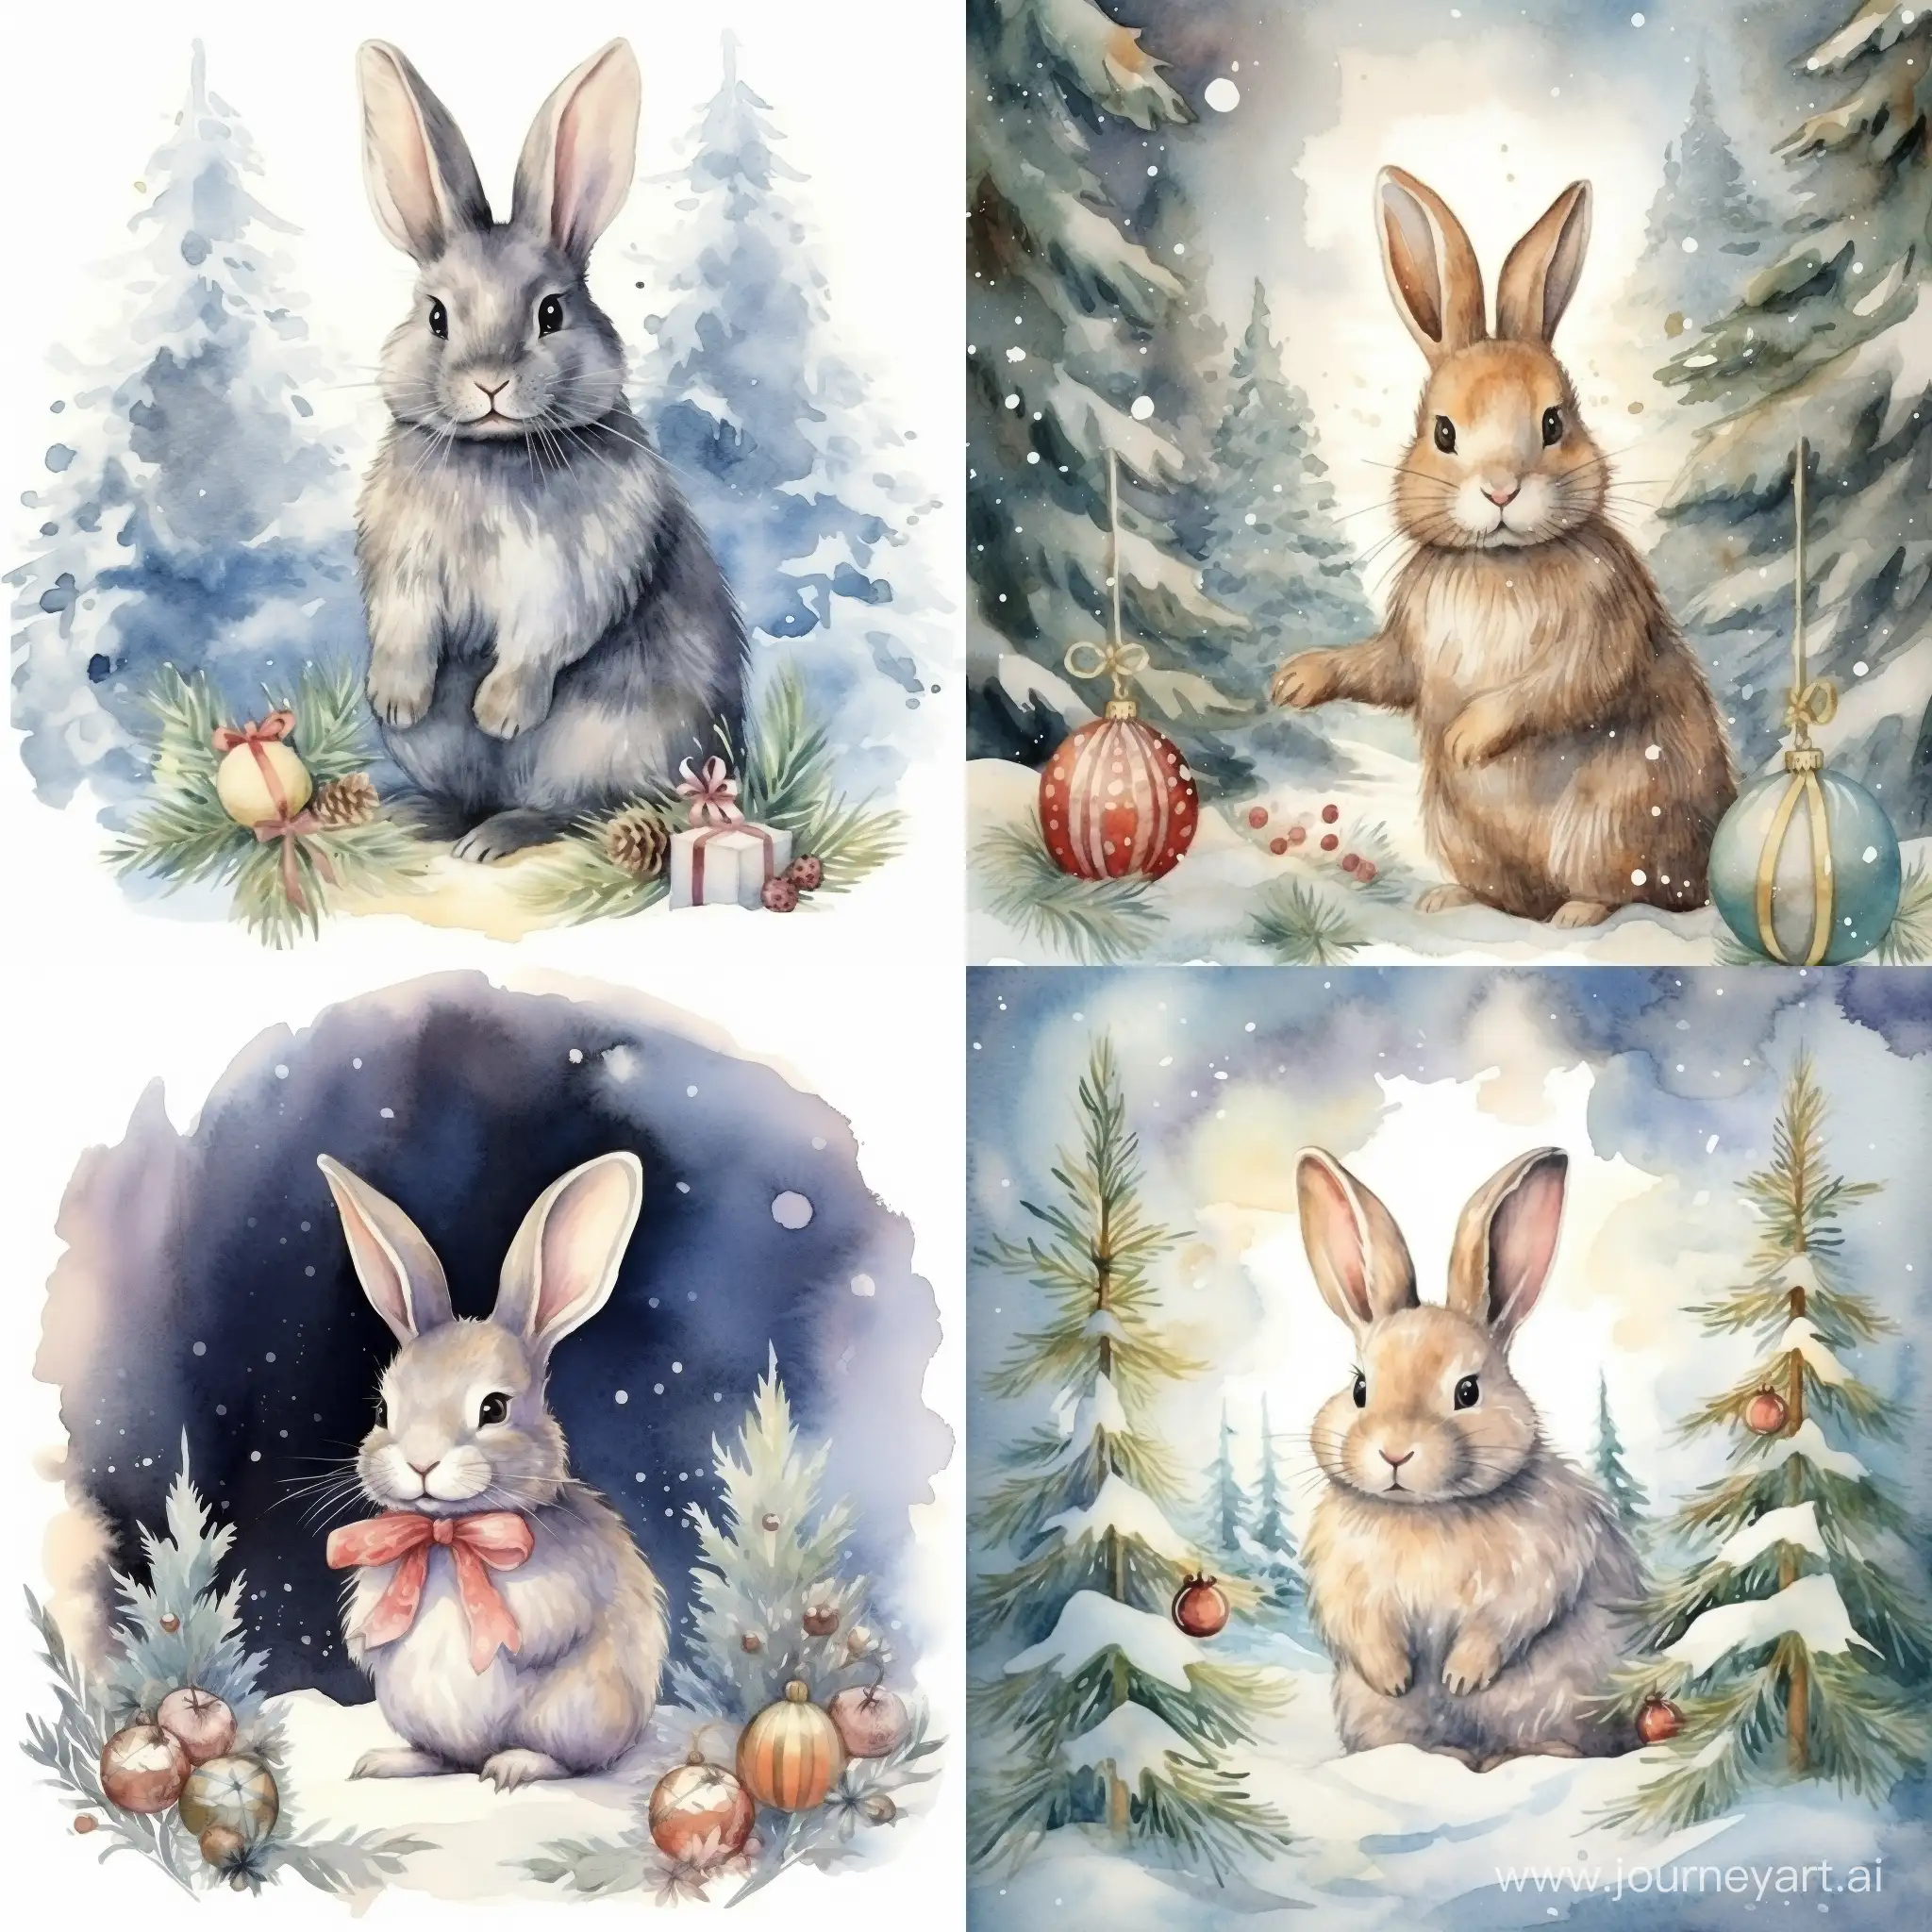 a bunny on a winter background in antique clothes decorates a Christmas tree in the forest. The moon is shining and the stars are shining. Vintage  Christmas card in watercolor realism style.